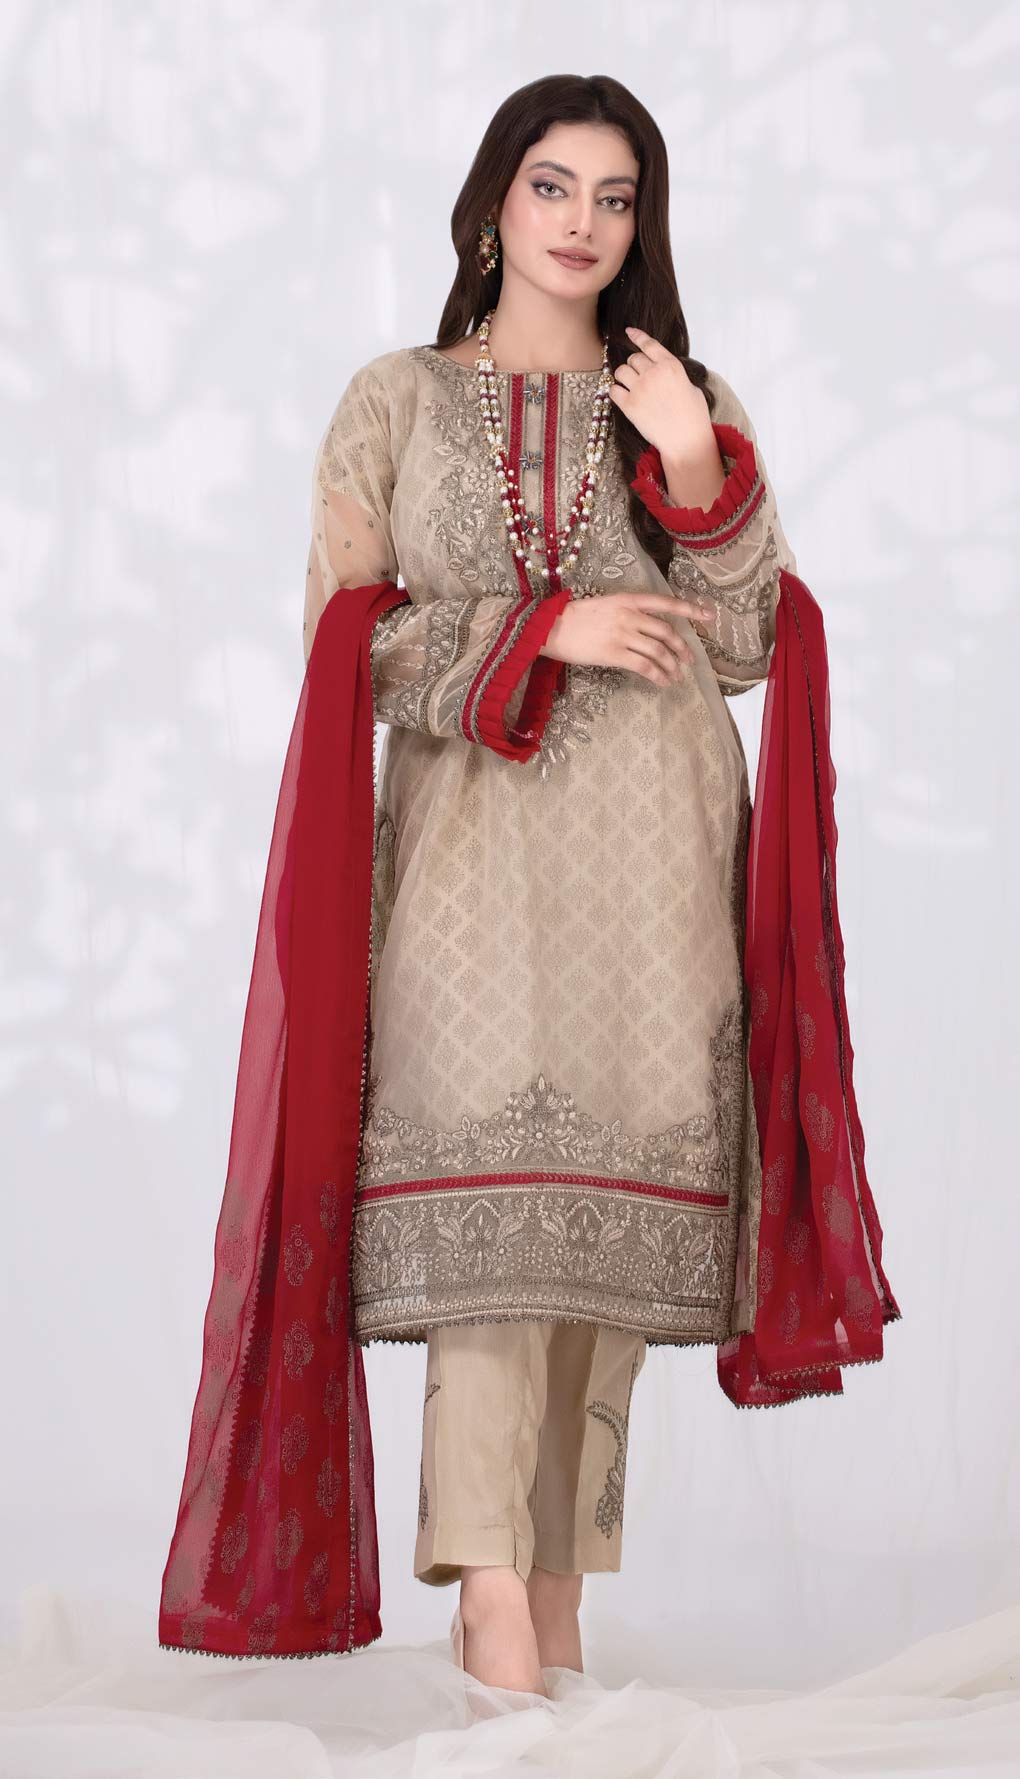  Semi Formal Suit with red dupatta